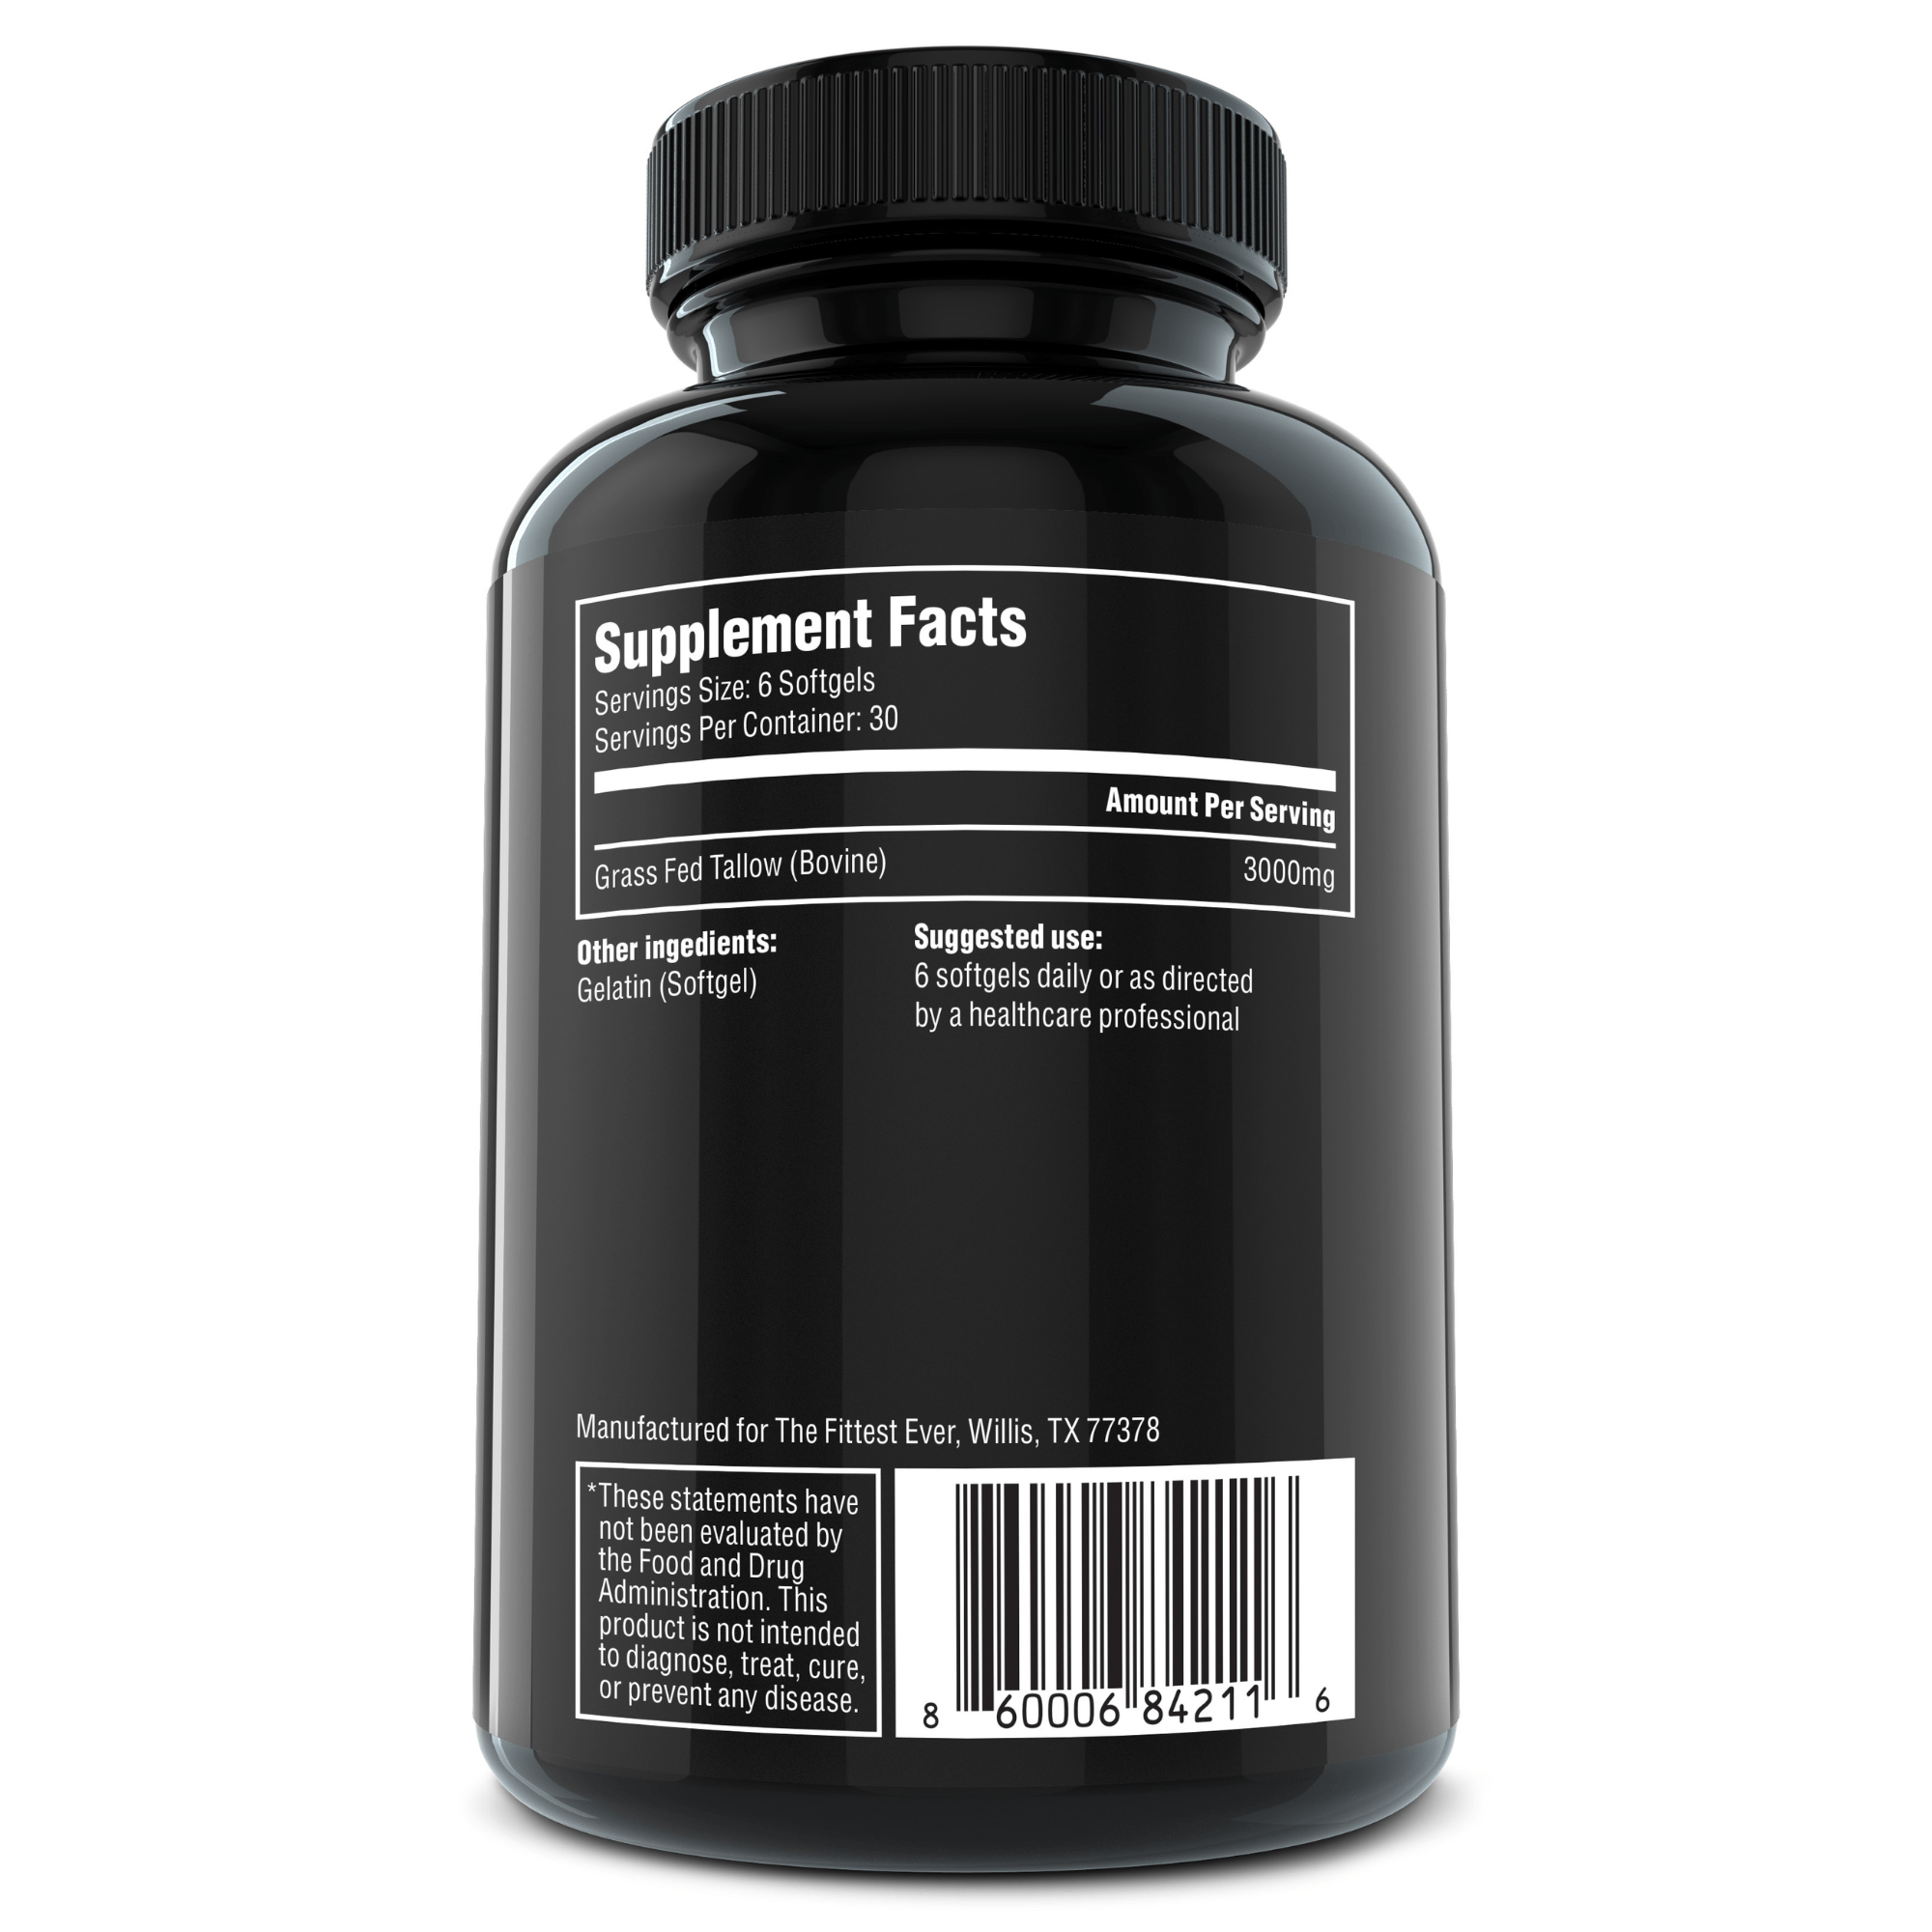 The backside of a bottle of Fuel with the supplement facts panel presented